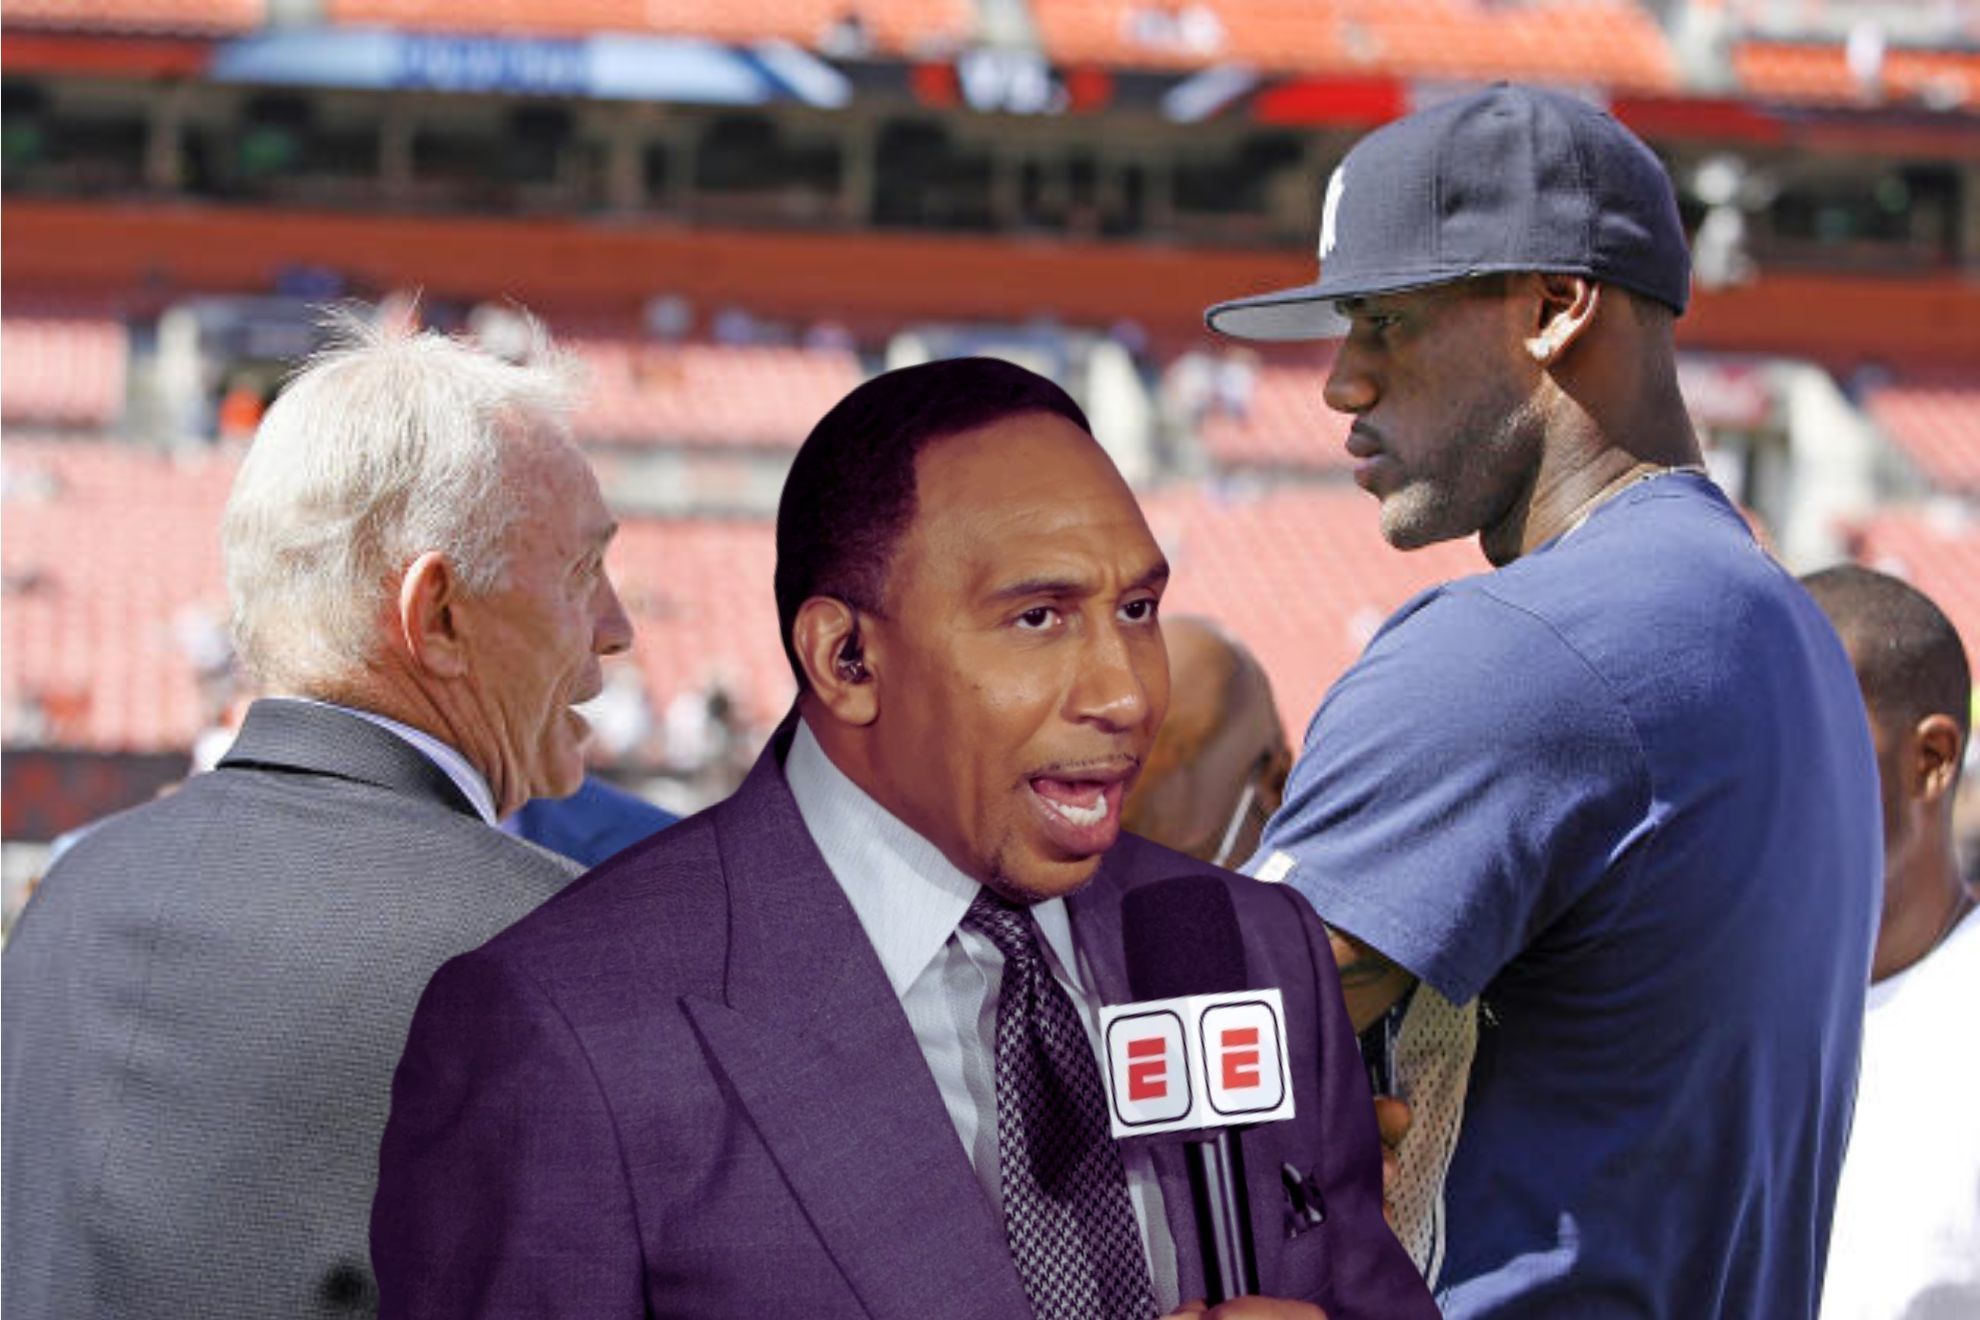 Stephen A. Smith (middle) sides with LeBron James after he voiced his concerns about not being prodded for his thoughts on Jerry Jones 1957 photograph.